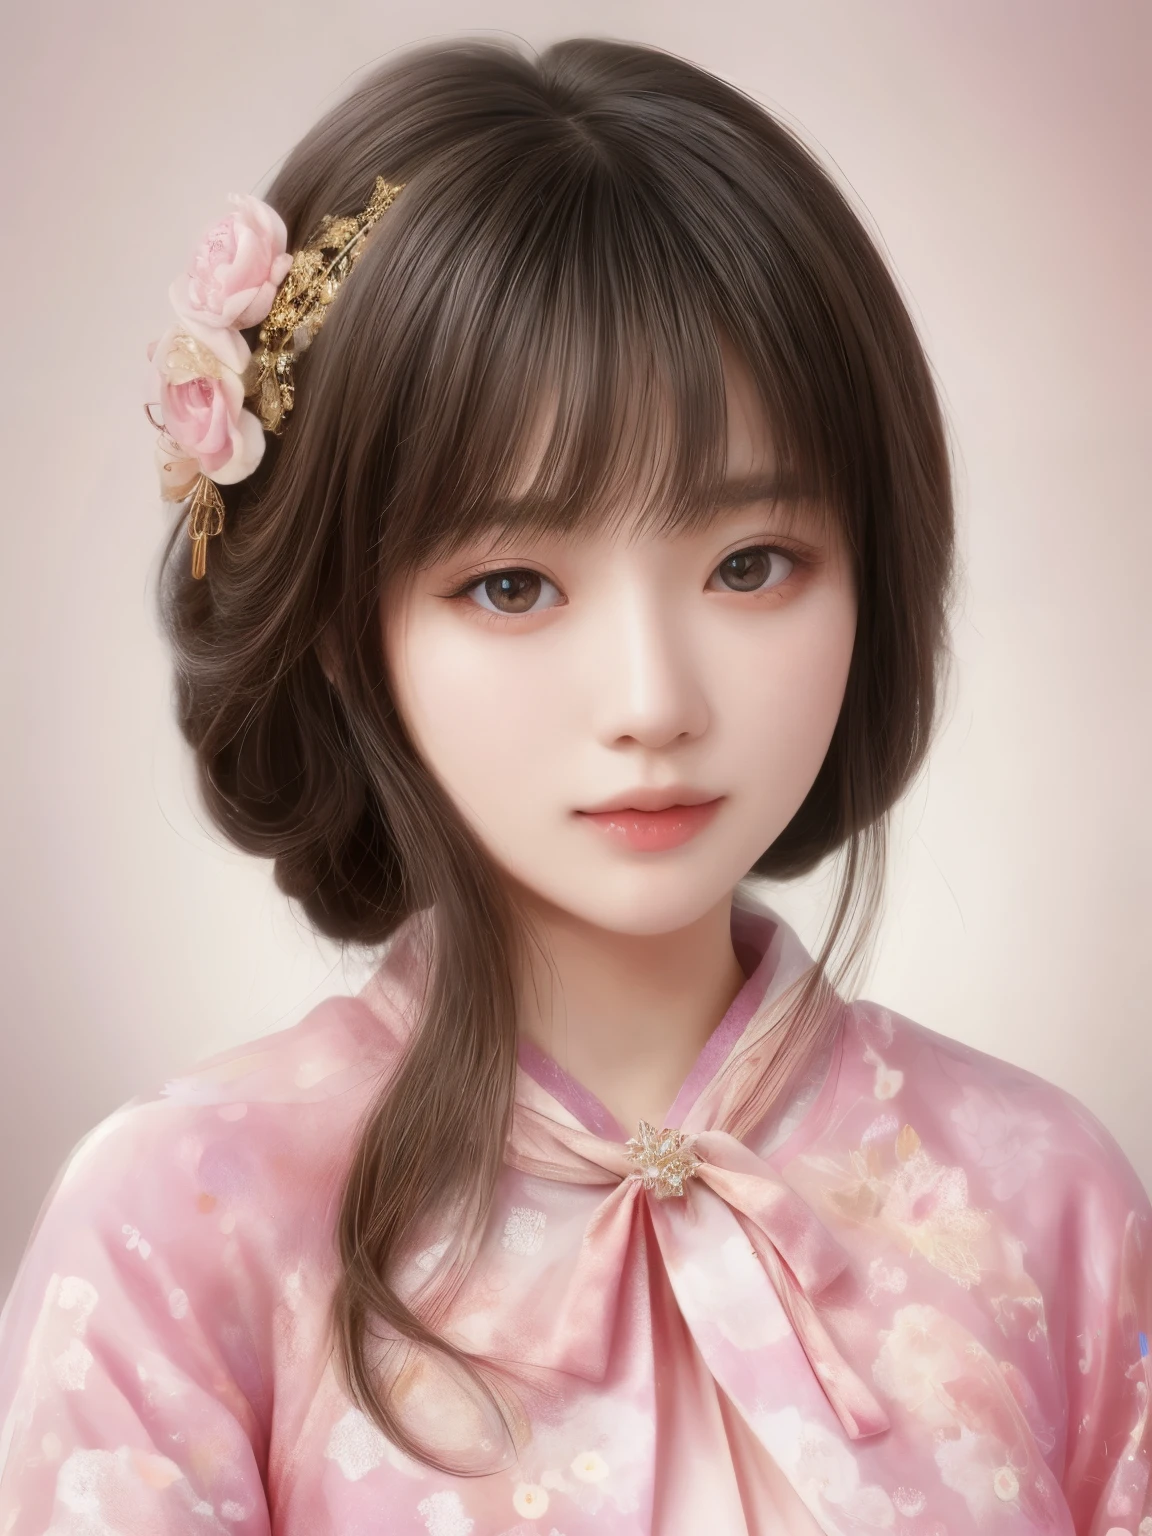 Hyper-realistic portrait of a Japanese girl, elegant and sophisticated, close-up, shallow depth of field, soft lighting, high resolution, accurate representation, unique, creative, well-lit, clear details, Canon EOS R5, 85mm lens, f/1.2, refined, well-composed, unique pose, neutral color tones, intricate details, natural beauty